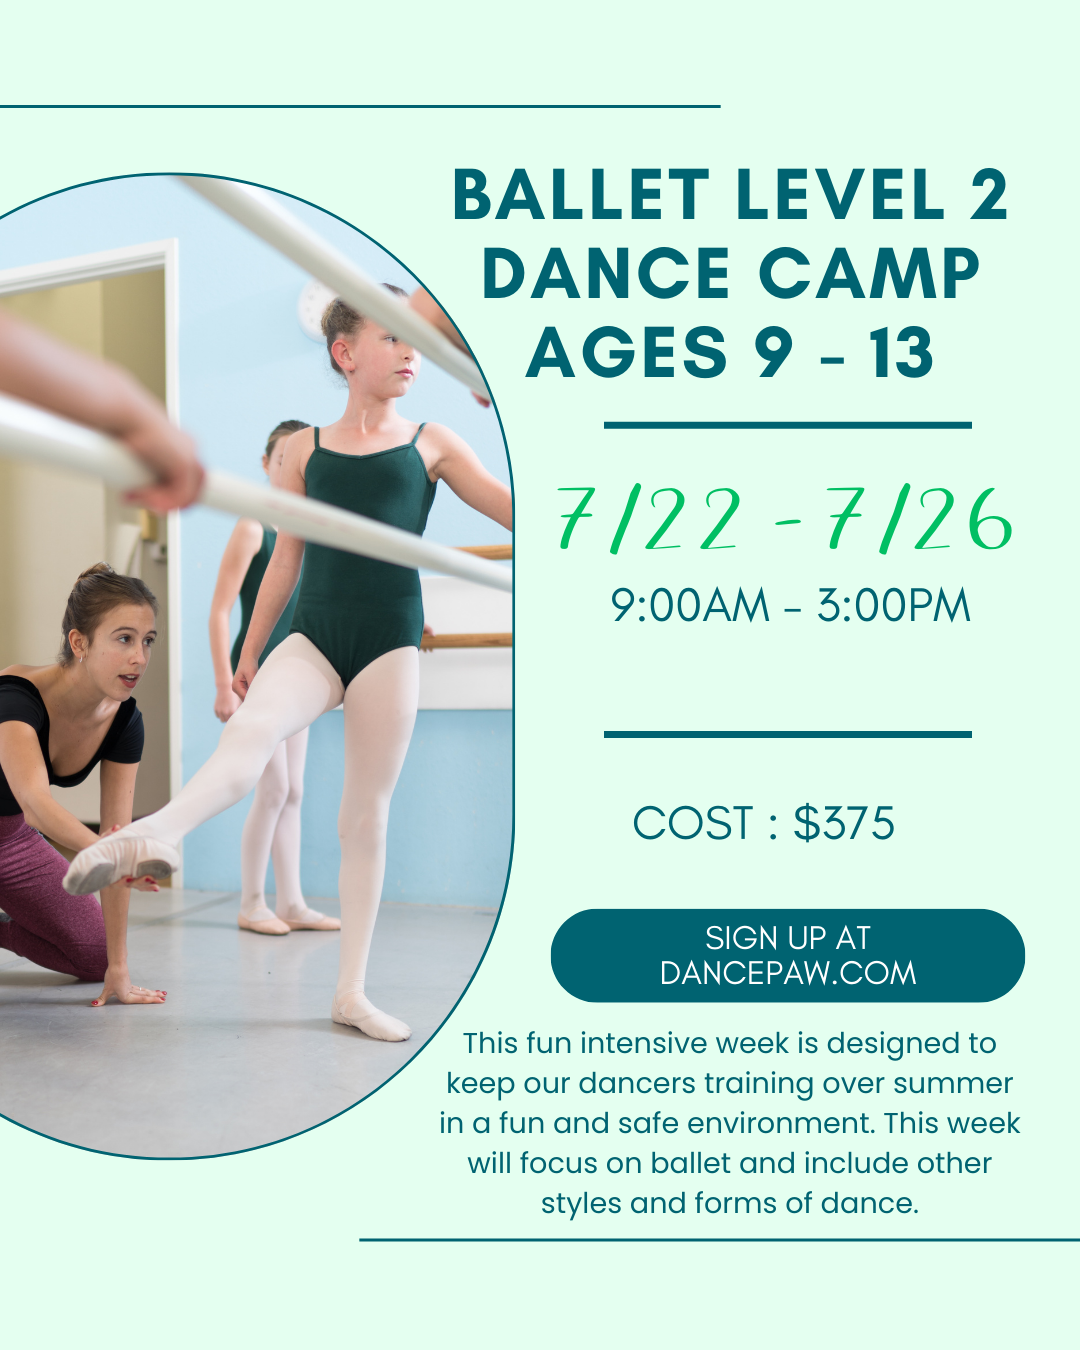 Copy of BALLET LEVEL 1 DANCE CAMP AGES 7 - 12.PNG